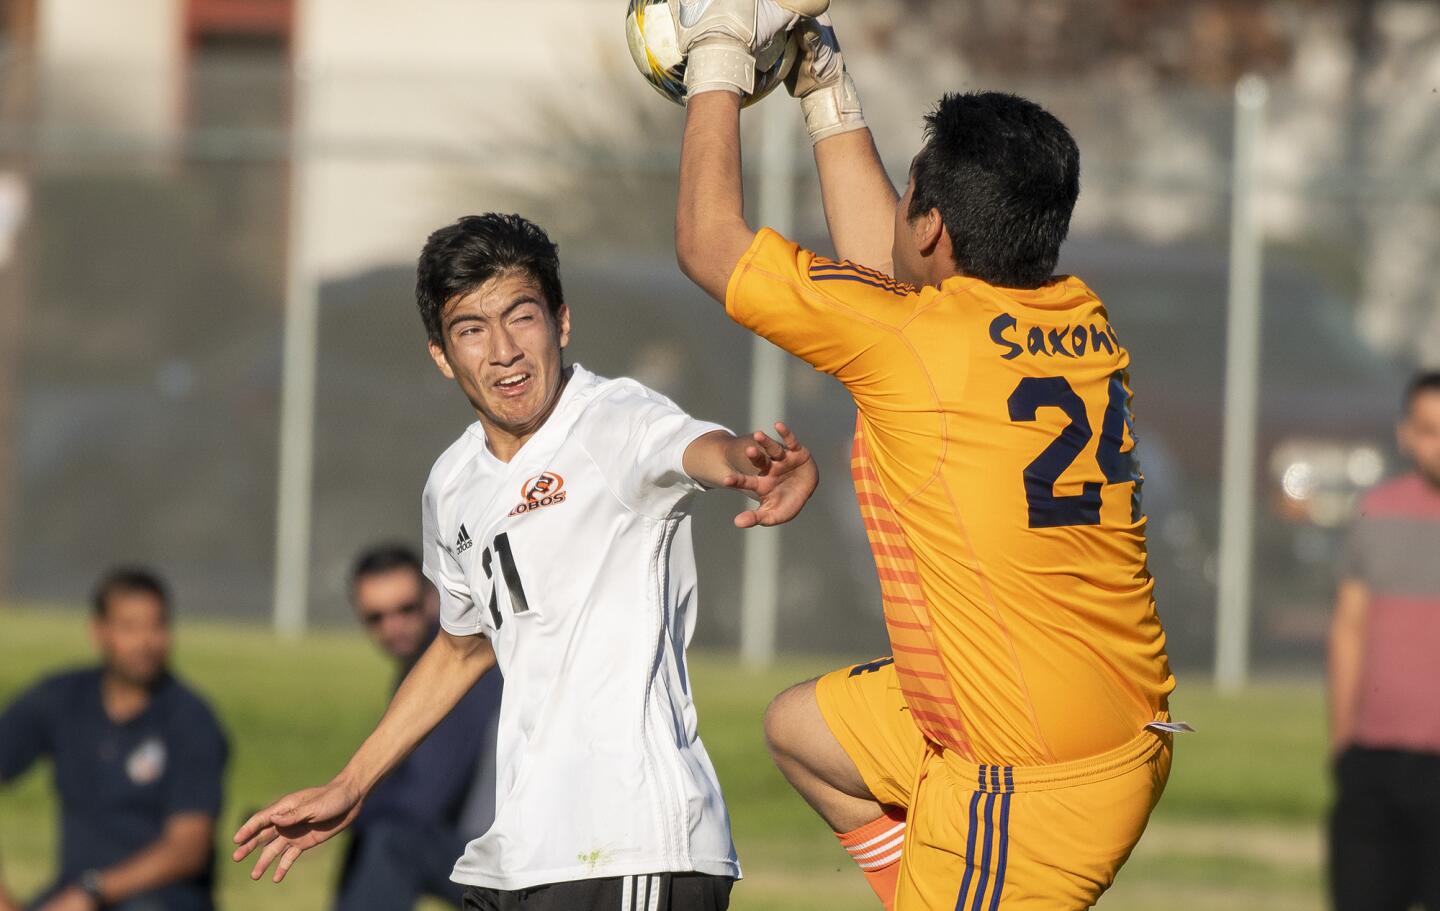 Los Amigos' Francisco Lopez goes up for a ball against Loara's goal keeper Luis Garcia during a Garden Grove League match on Friday, January 25.